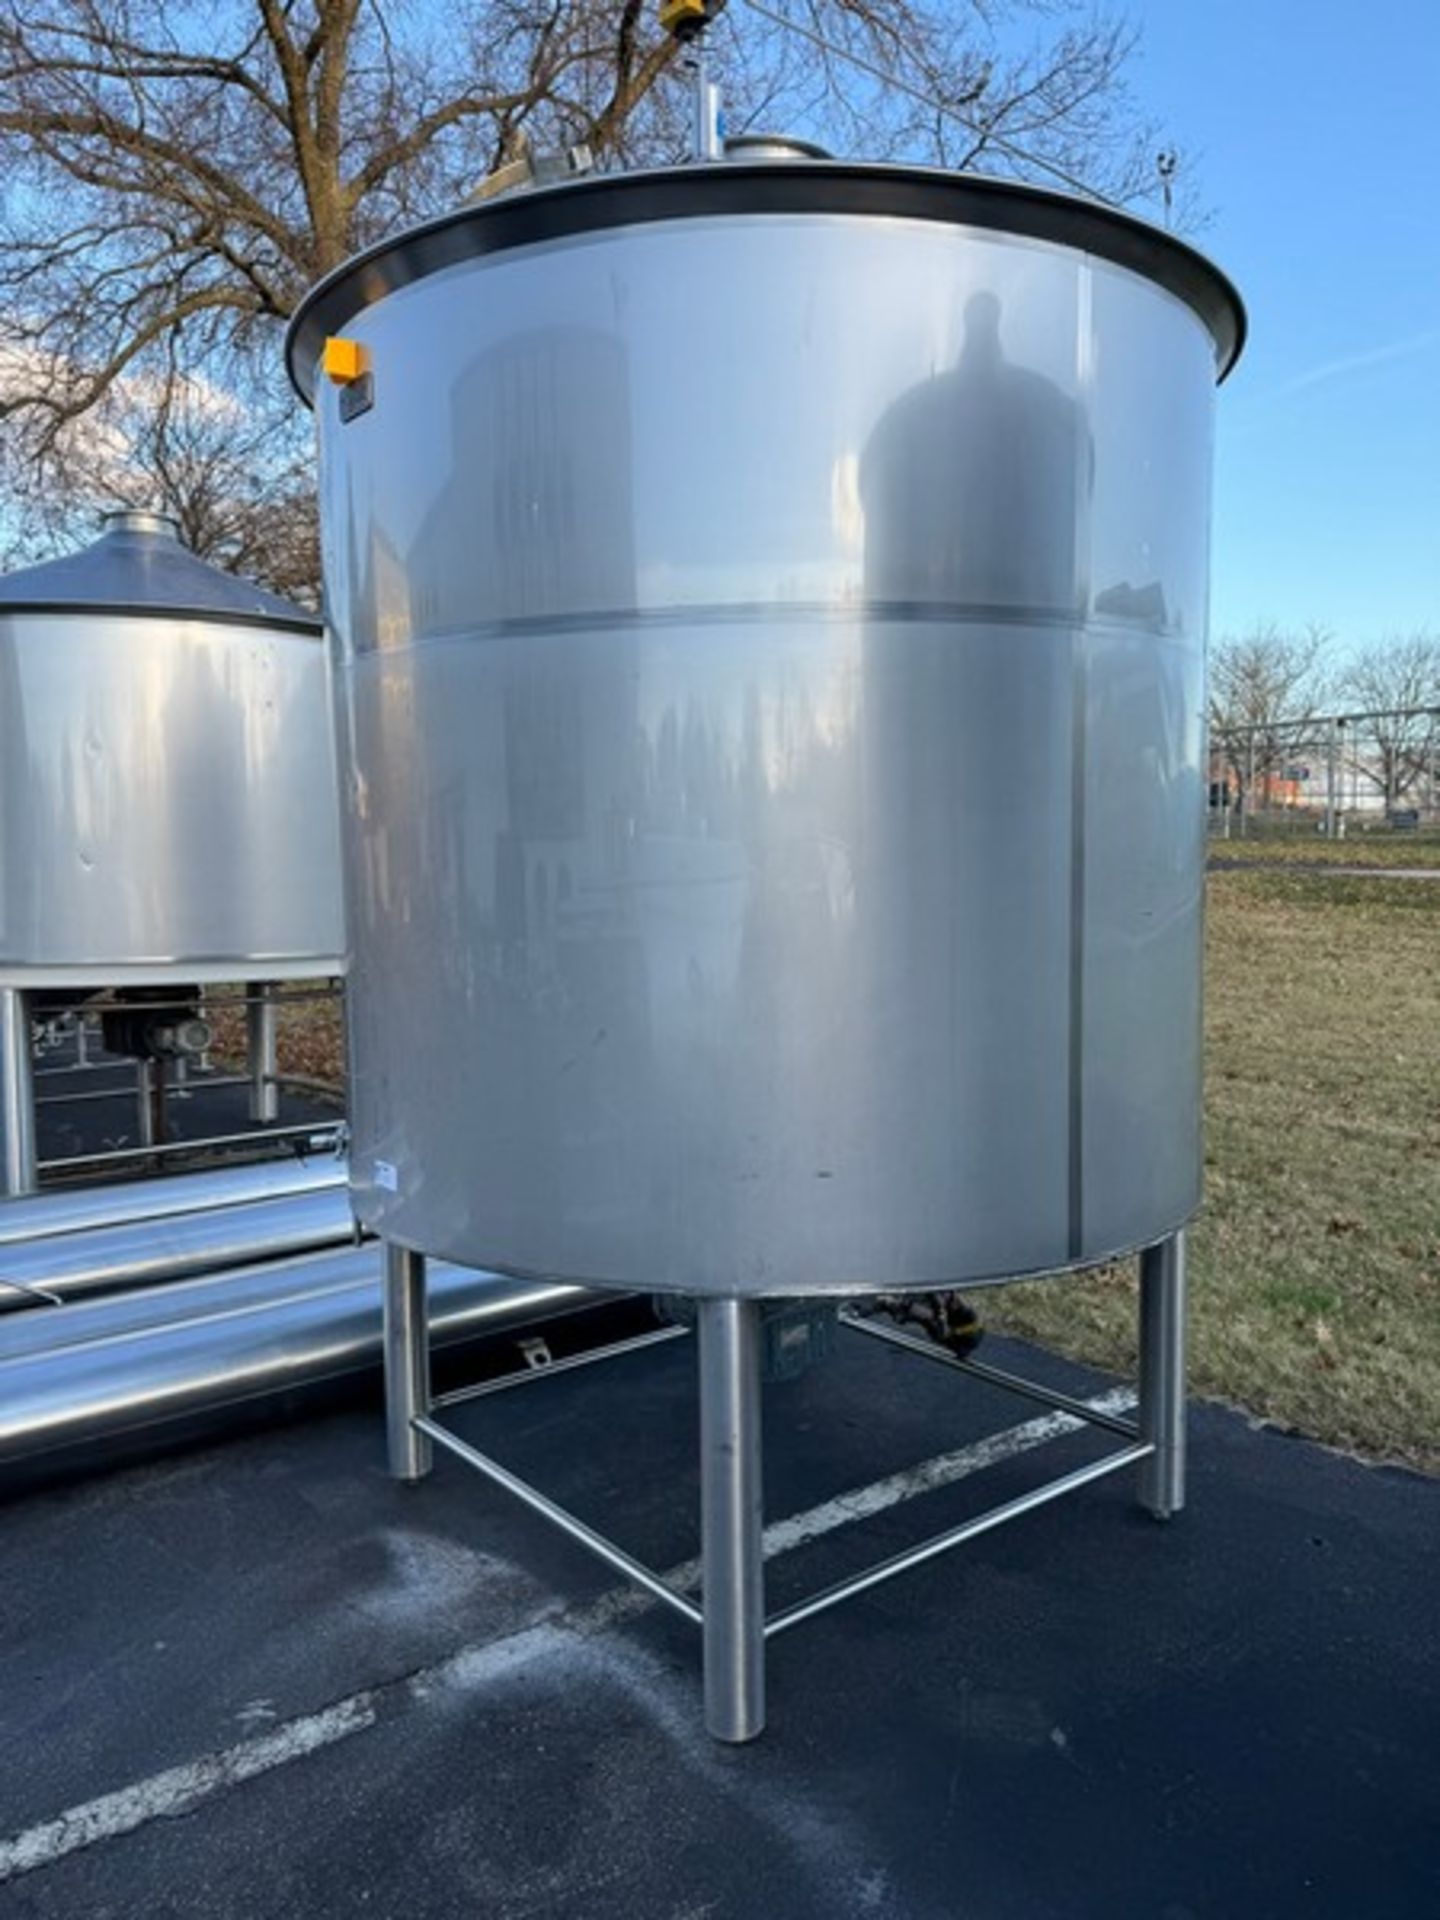 2012 Specific Mechanical Systems 45 BBL Capacity S/S Mash Tun Tank, S/N RMP-136-12, with Legs & S/ - Image 2 of 15